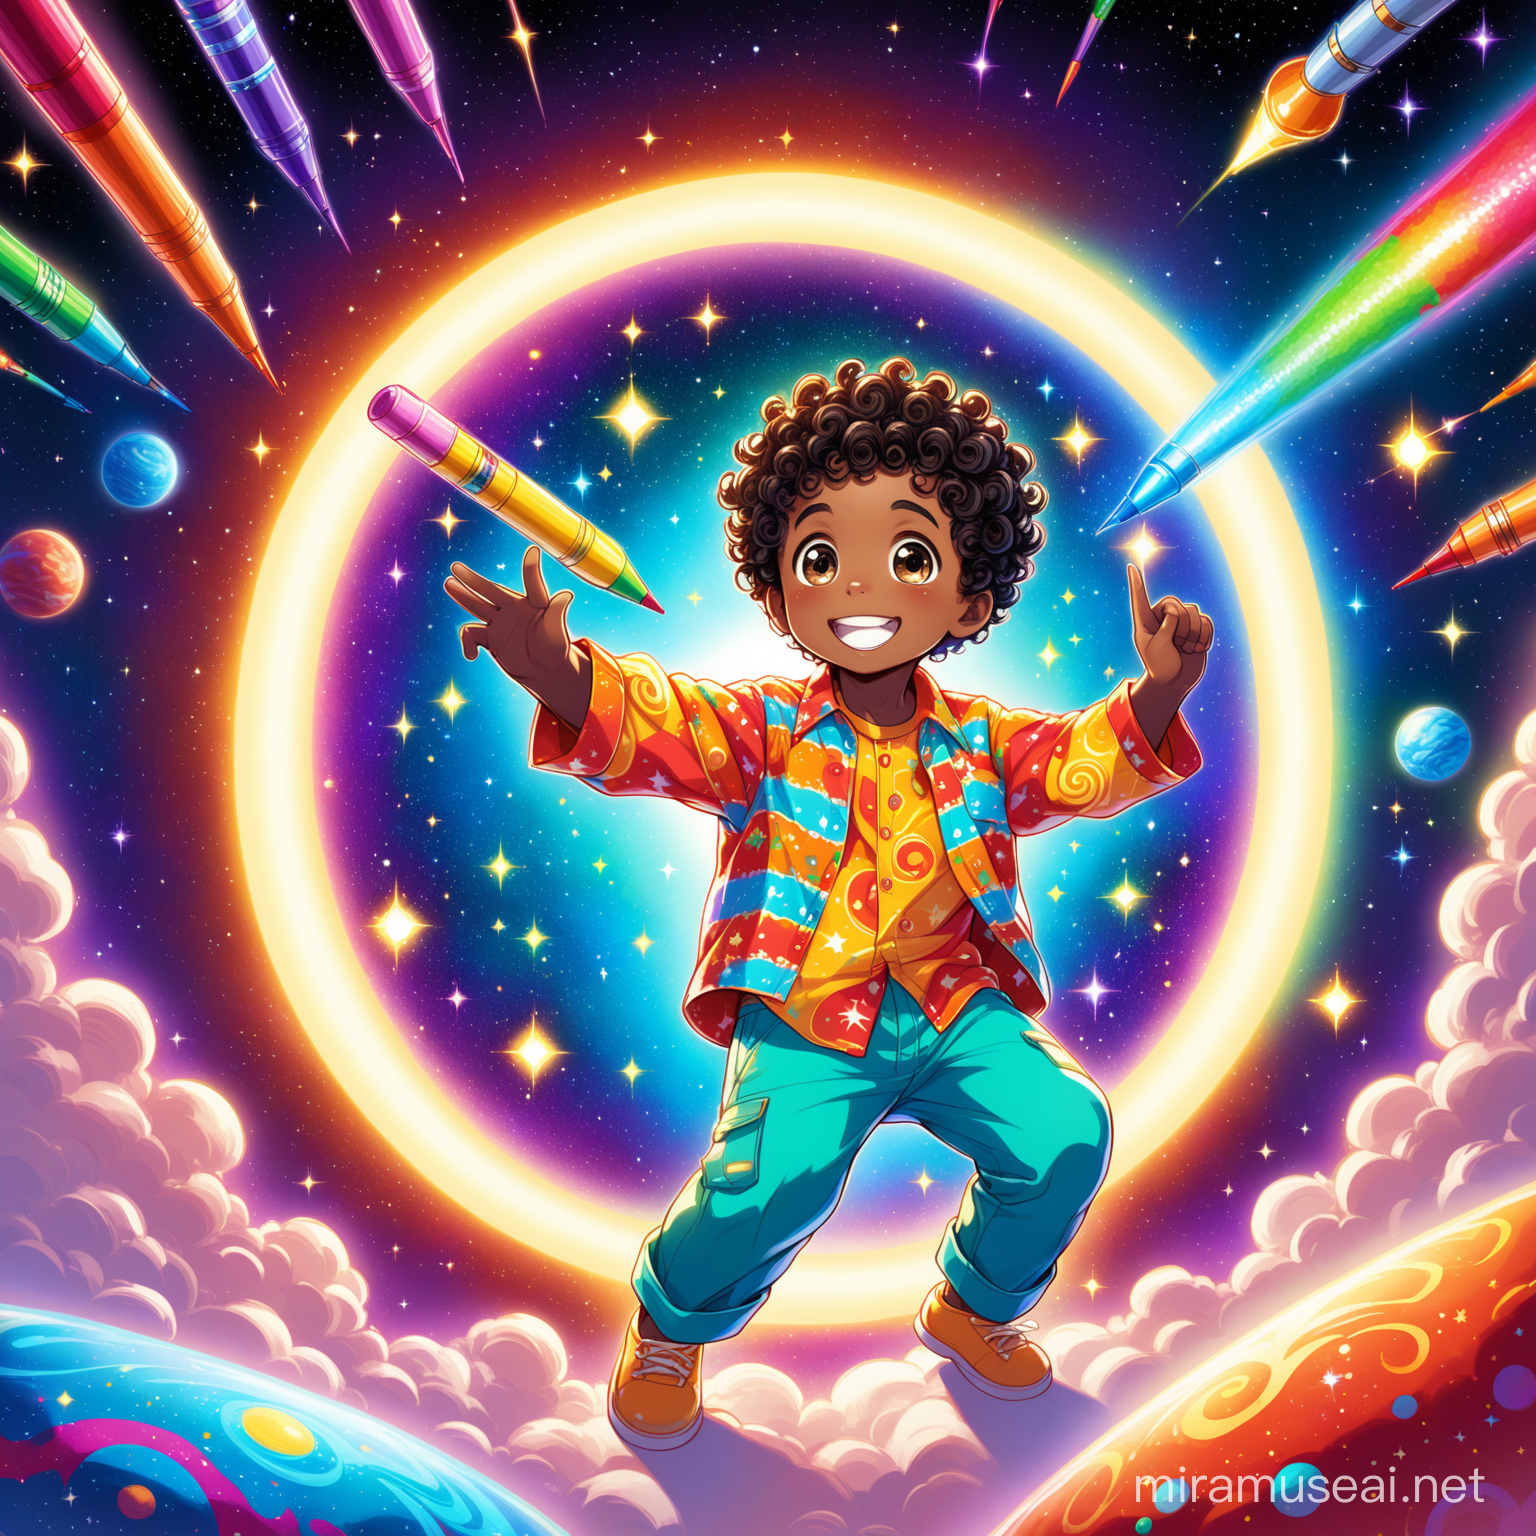 The little black boy has big, bright eyes full of curiosity and wonder. His curly hair forms a halo around his head, each curl bouncing with energy and life. He has a wide, infectious smile that lights up his face. He wears a colorful shirt with bold patterns, and his pants are patched with different fabrics, showing his adventurous spirit. In one hand, he holds a crayon, ready to create his next masterpiece, while the other hand is raised in a gesture of excitement and enthusiasm. while going through space portal

